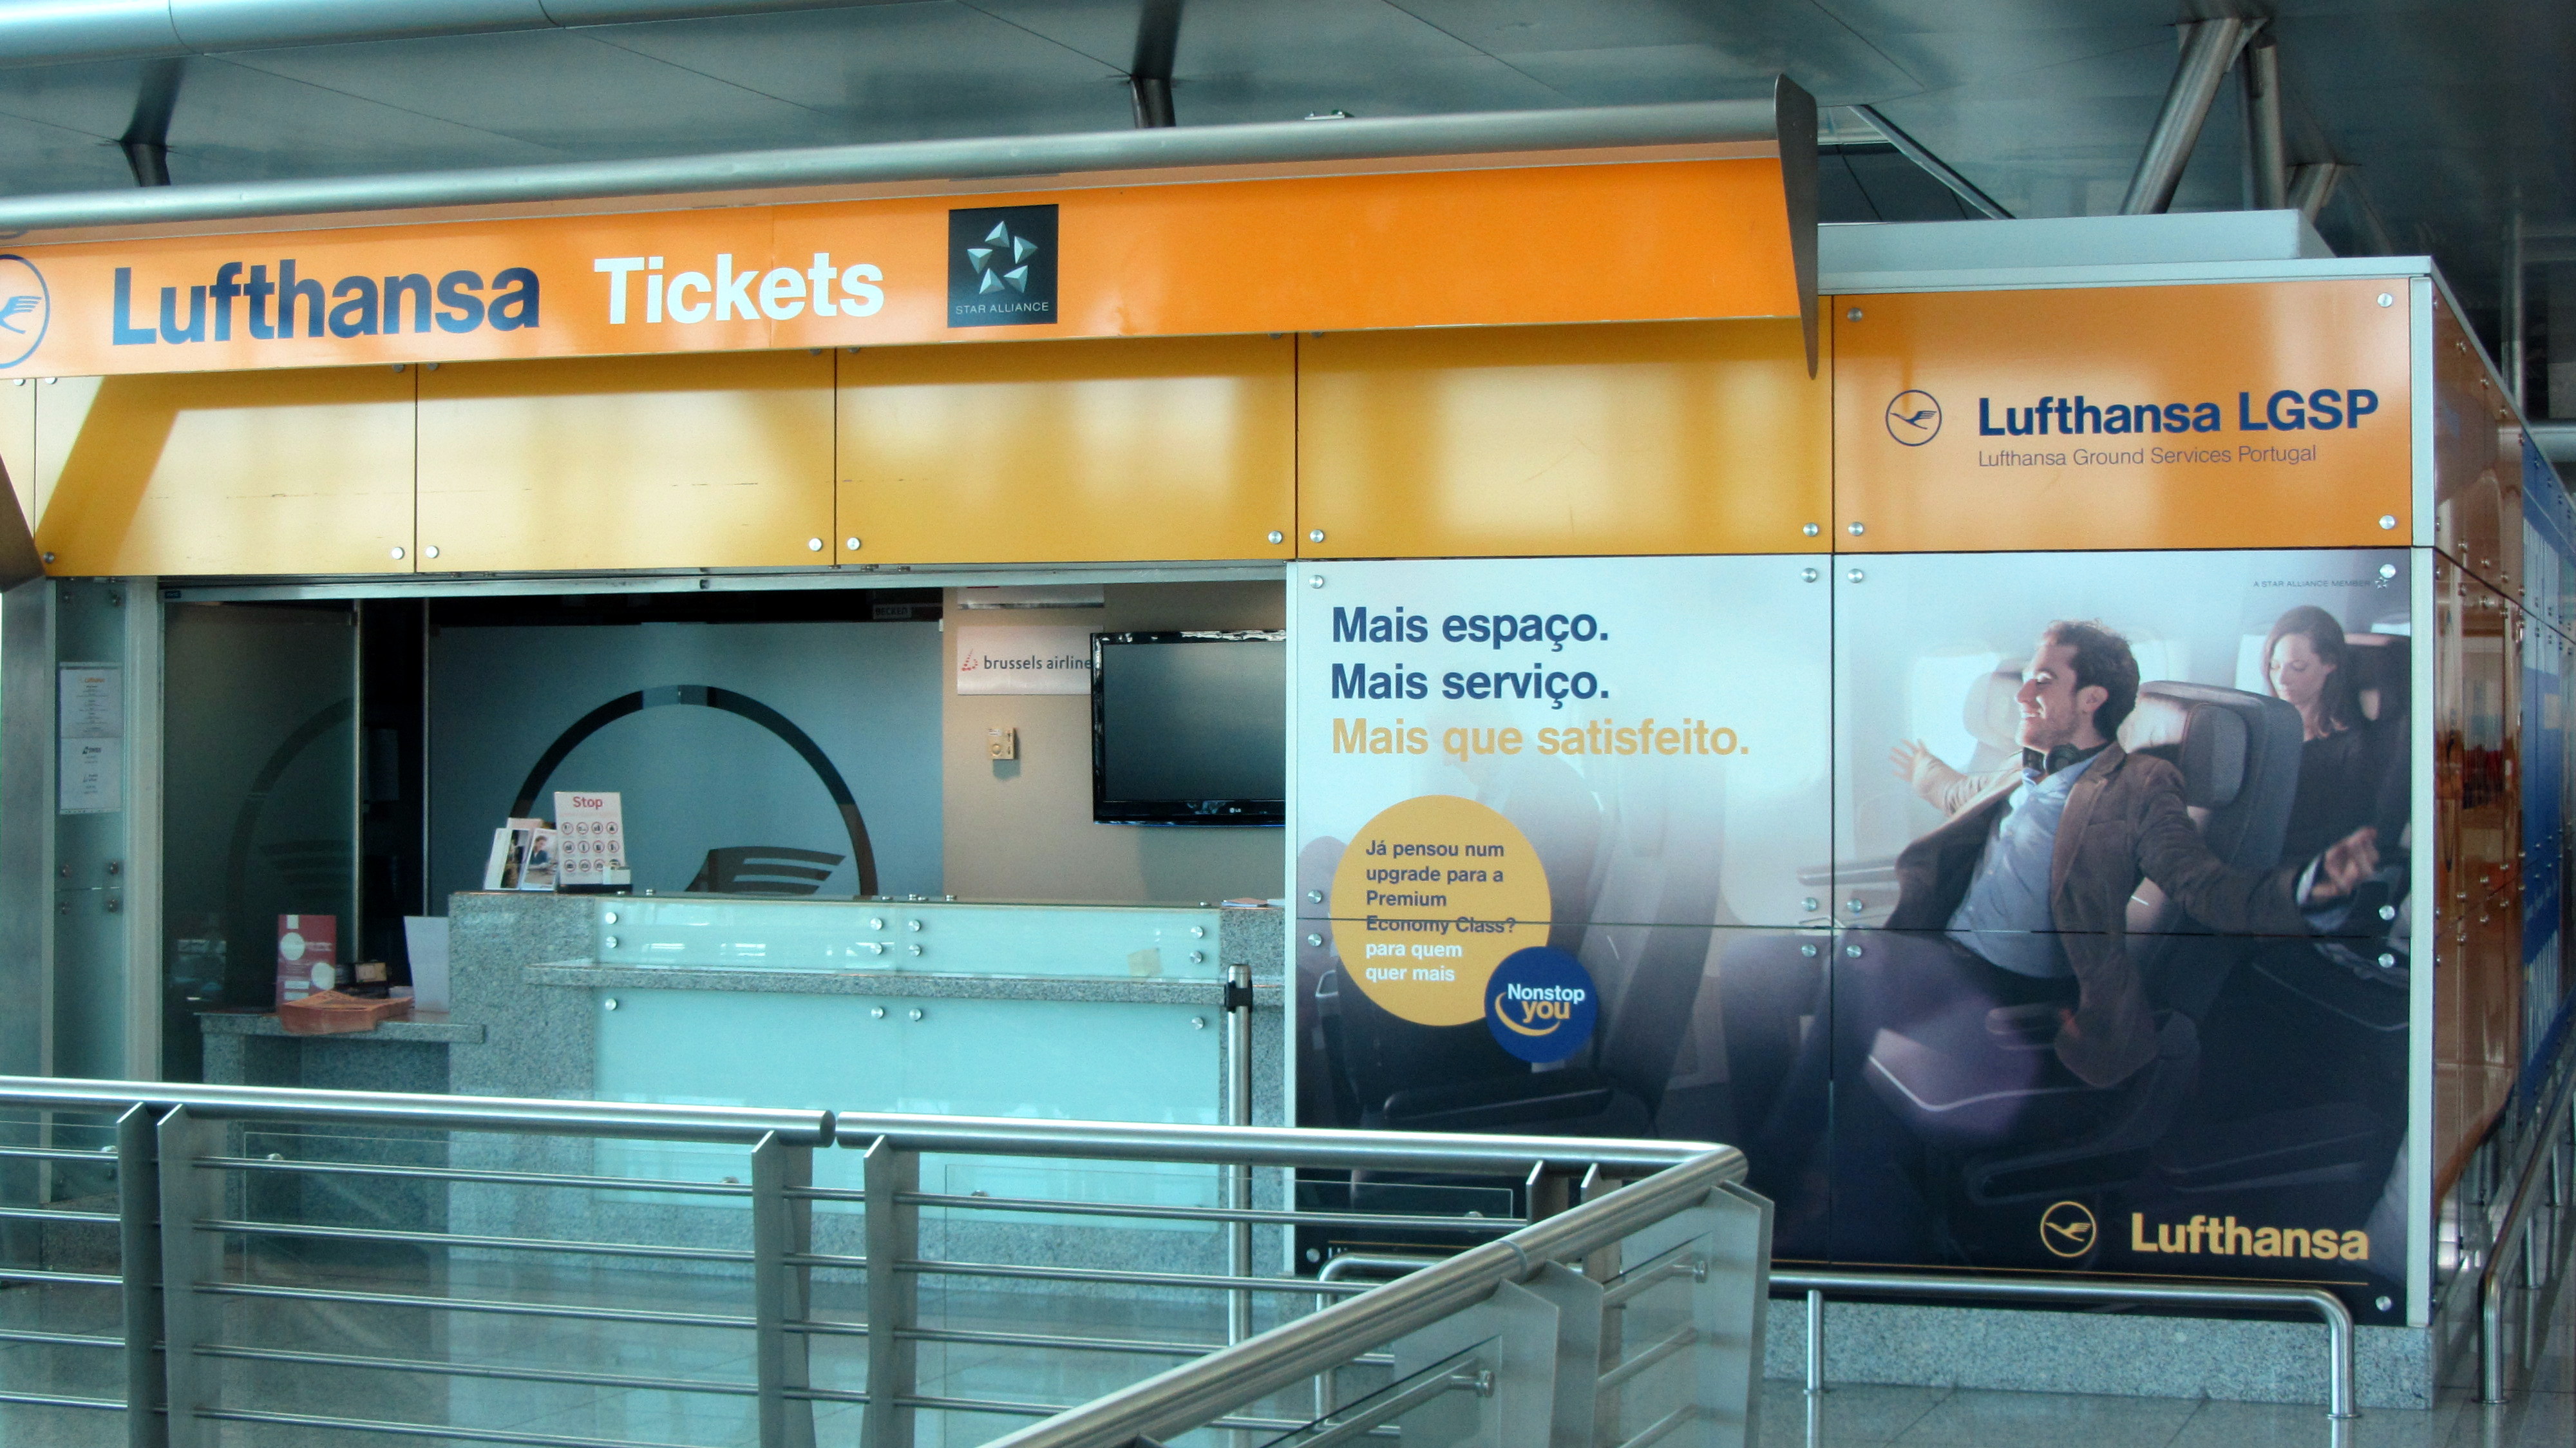 Do you see the very little &quot;Brussels Airlines&quot; sign in the Lufthansa ticket office?